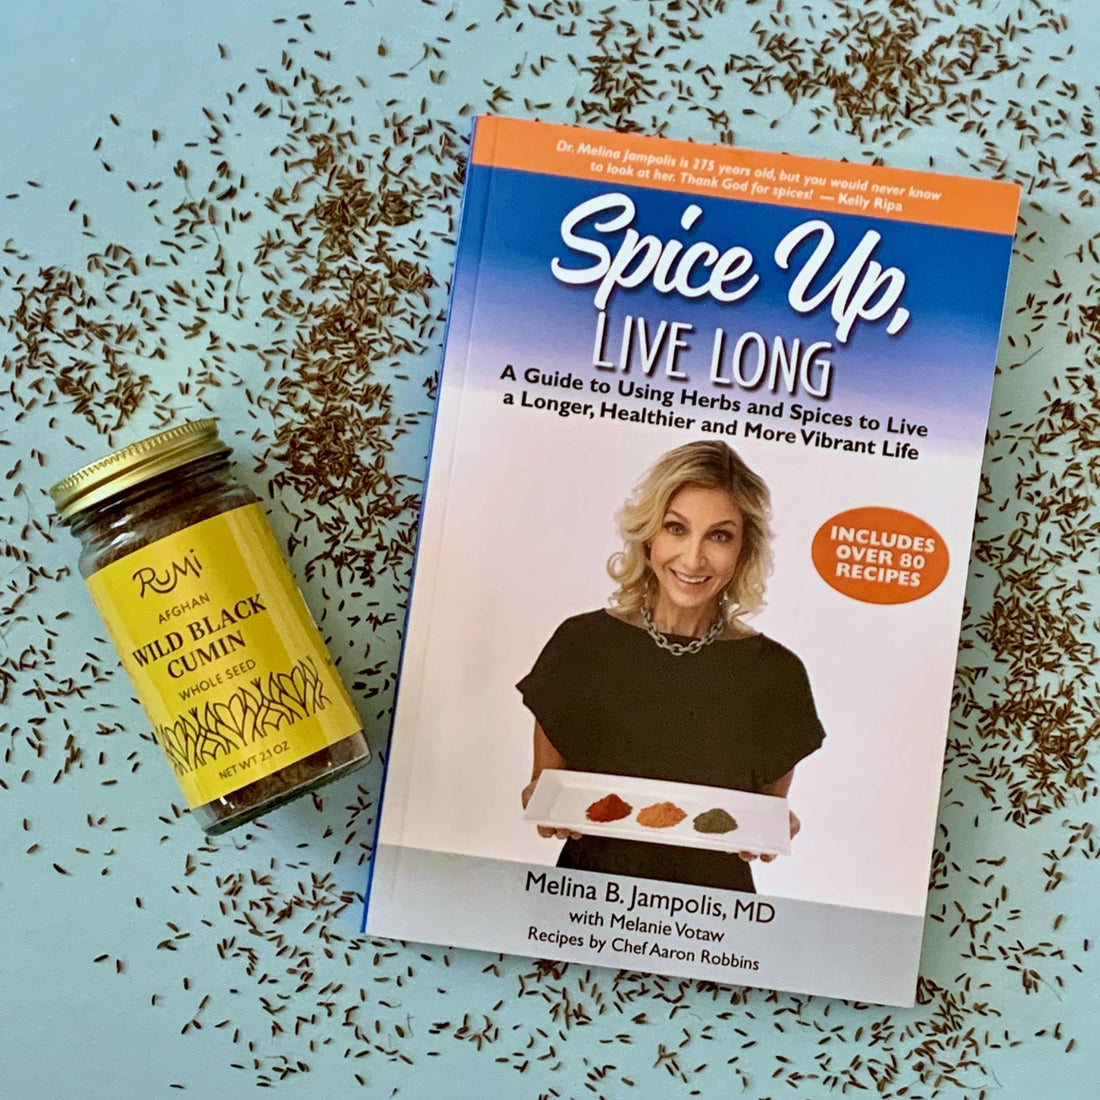 Spice Up, Live Long: Rumi Spice Talks Benefits of Health & Mission with Dr. Melina Jampolis - Rumi Spice